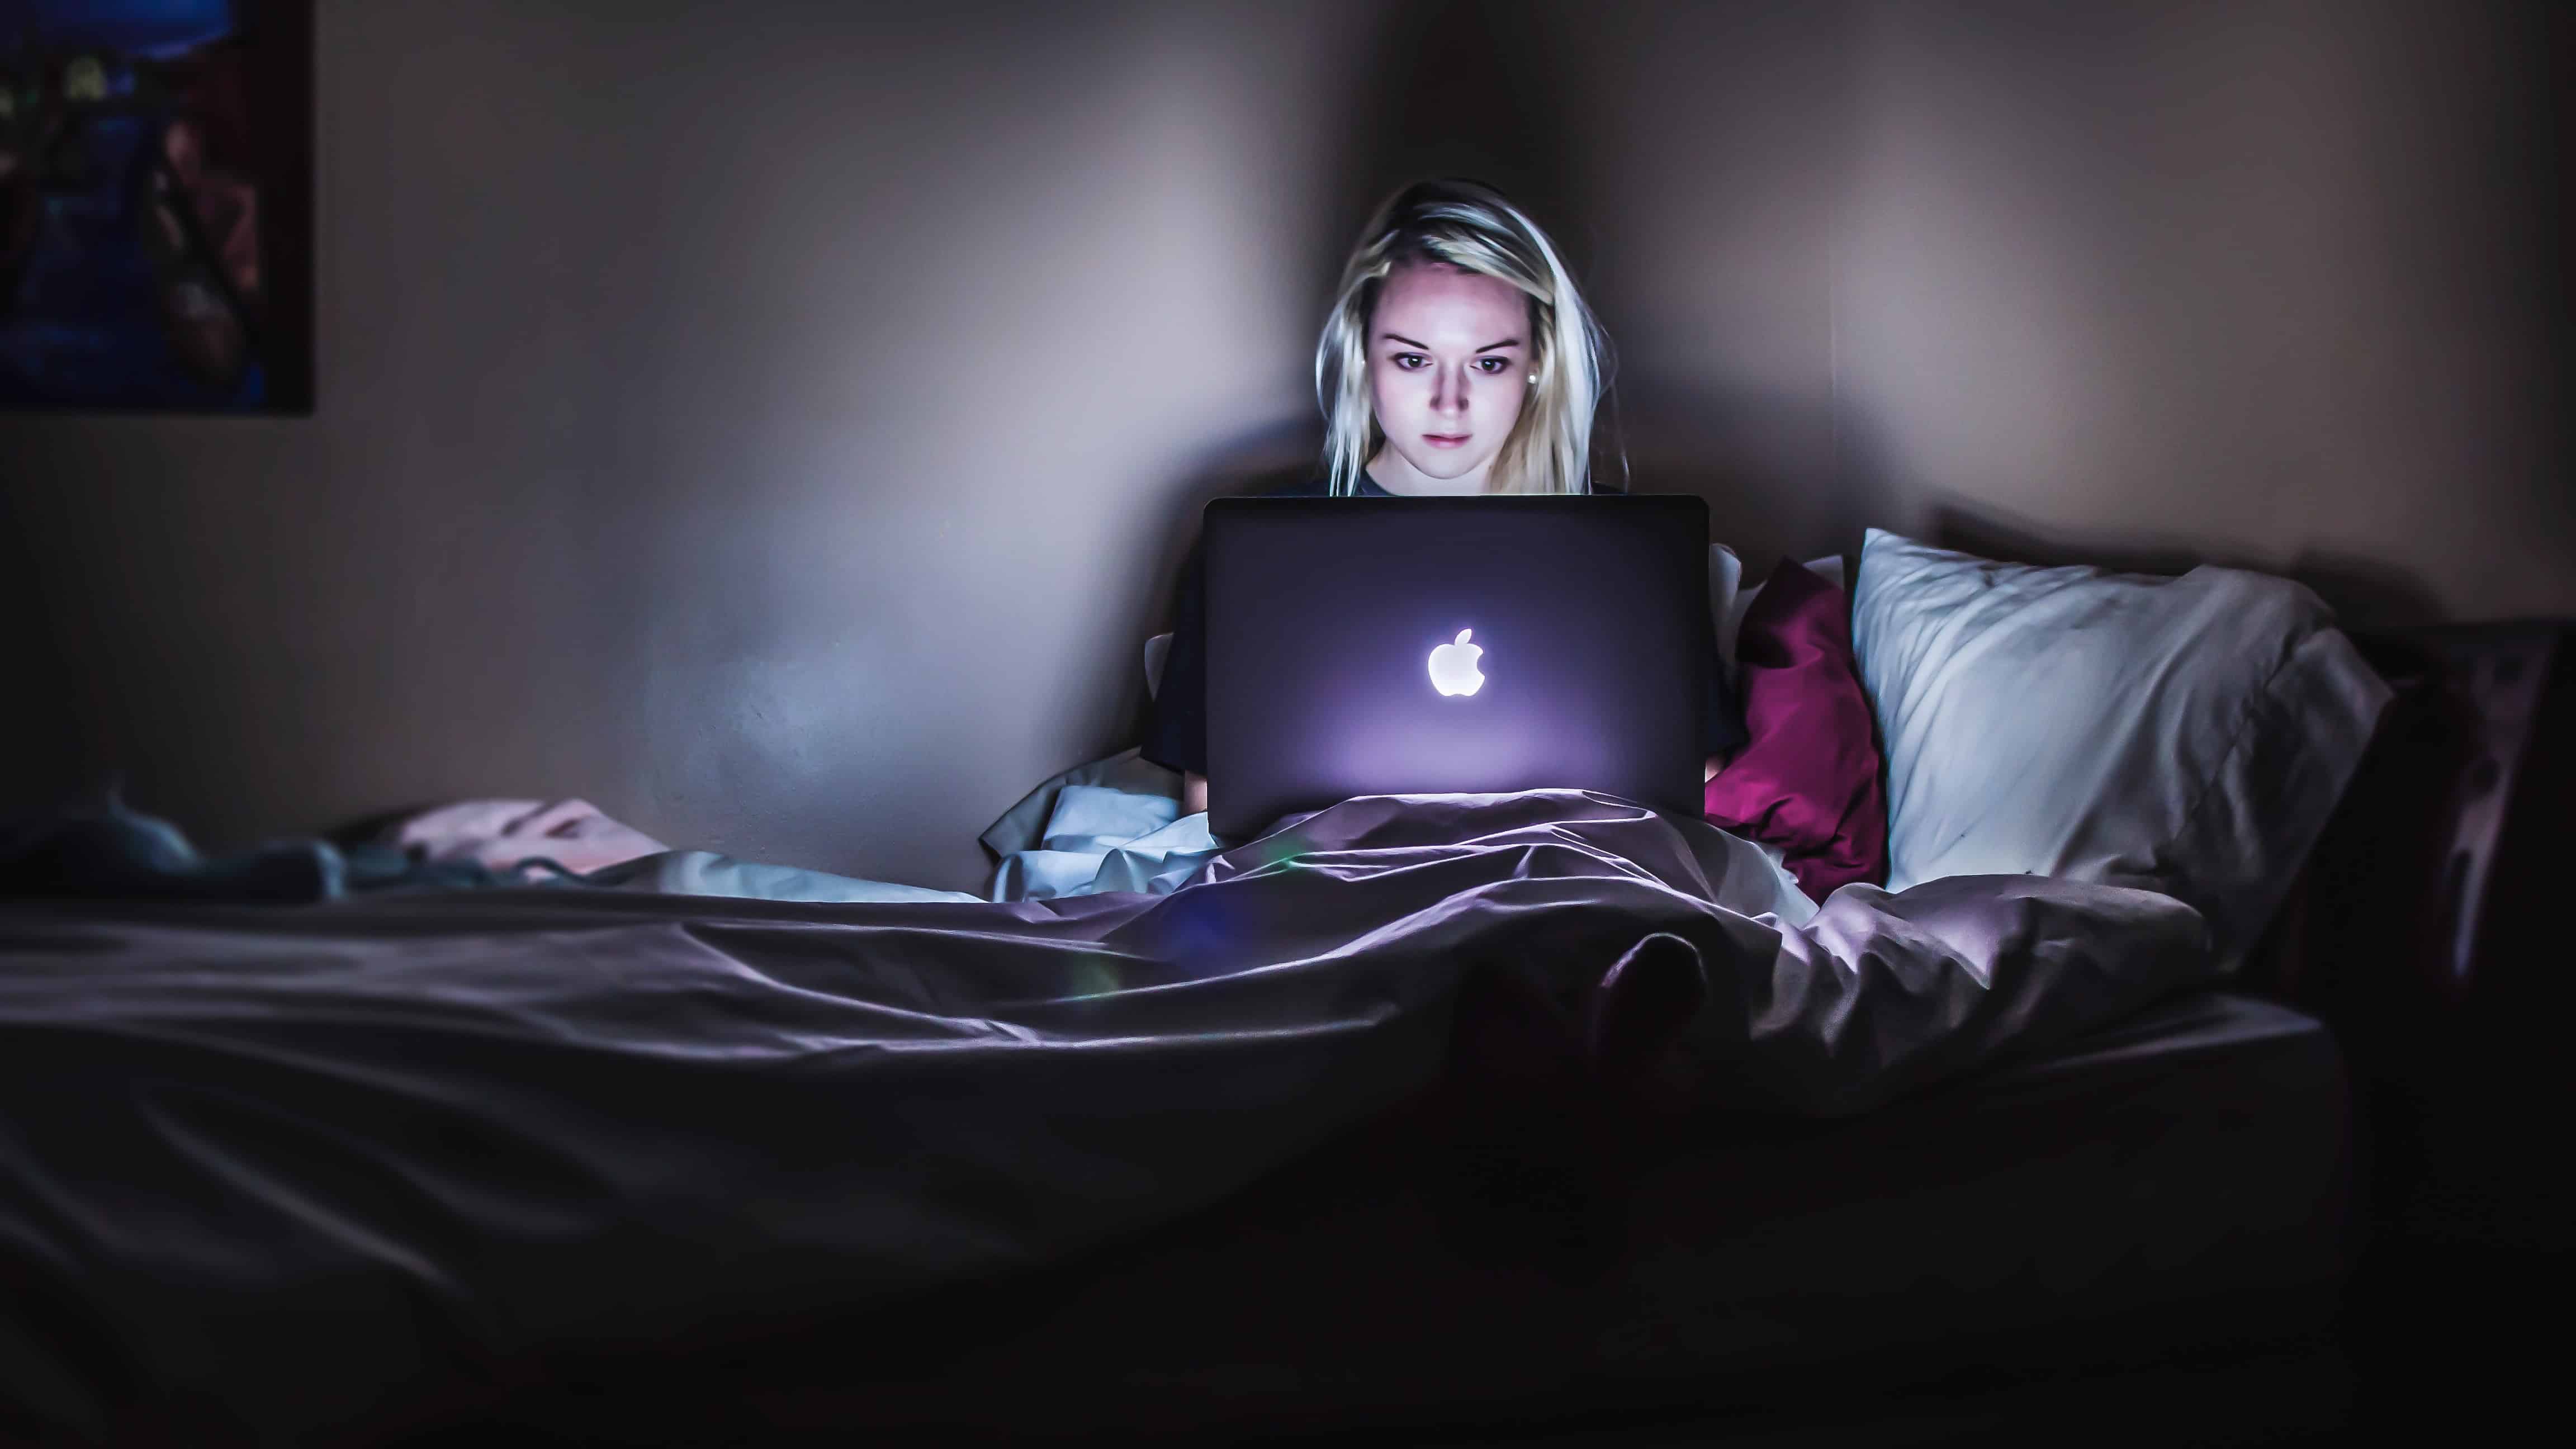 Woman Watching Porn On Her Computer - How Pornography Affects a Teen Brain - Focus on the Family